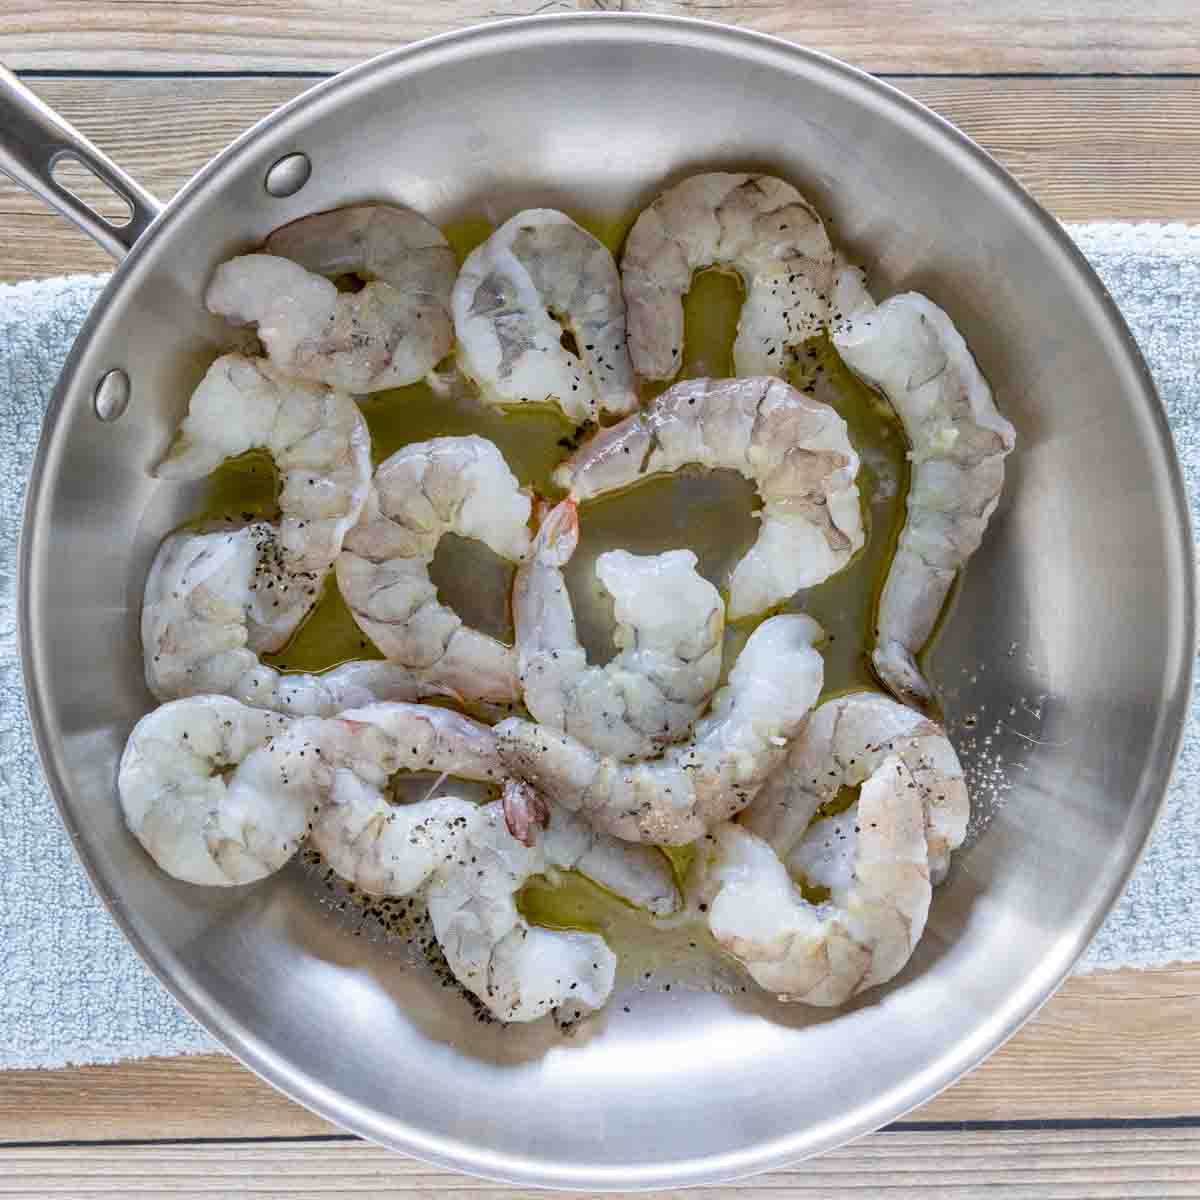 add olive oil and raw shrimp to the pan.